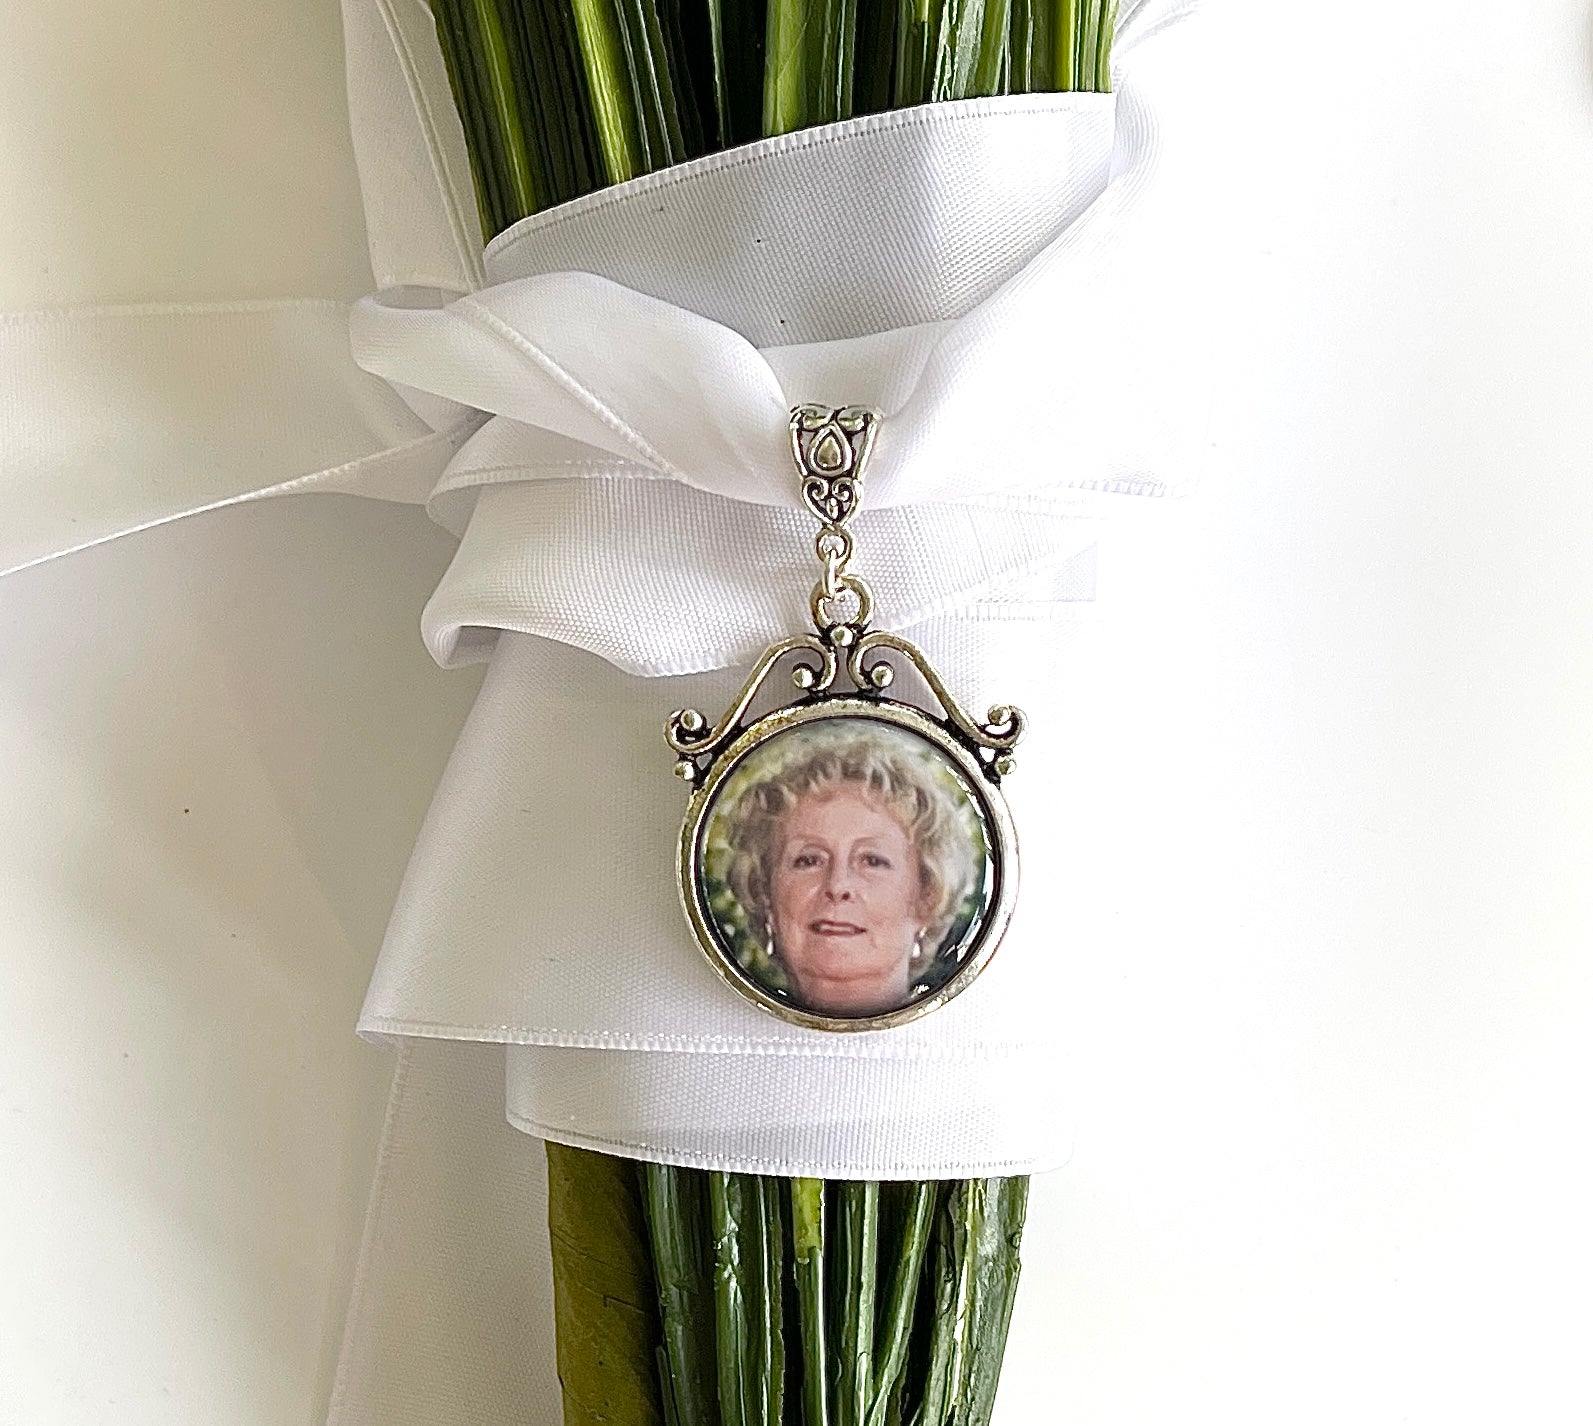 Bridal Bouquet Charm for bridal shower gift with memorial photo